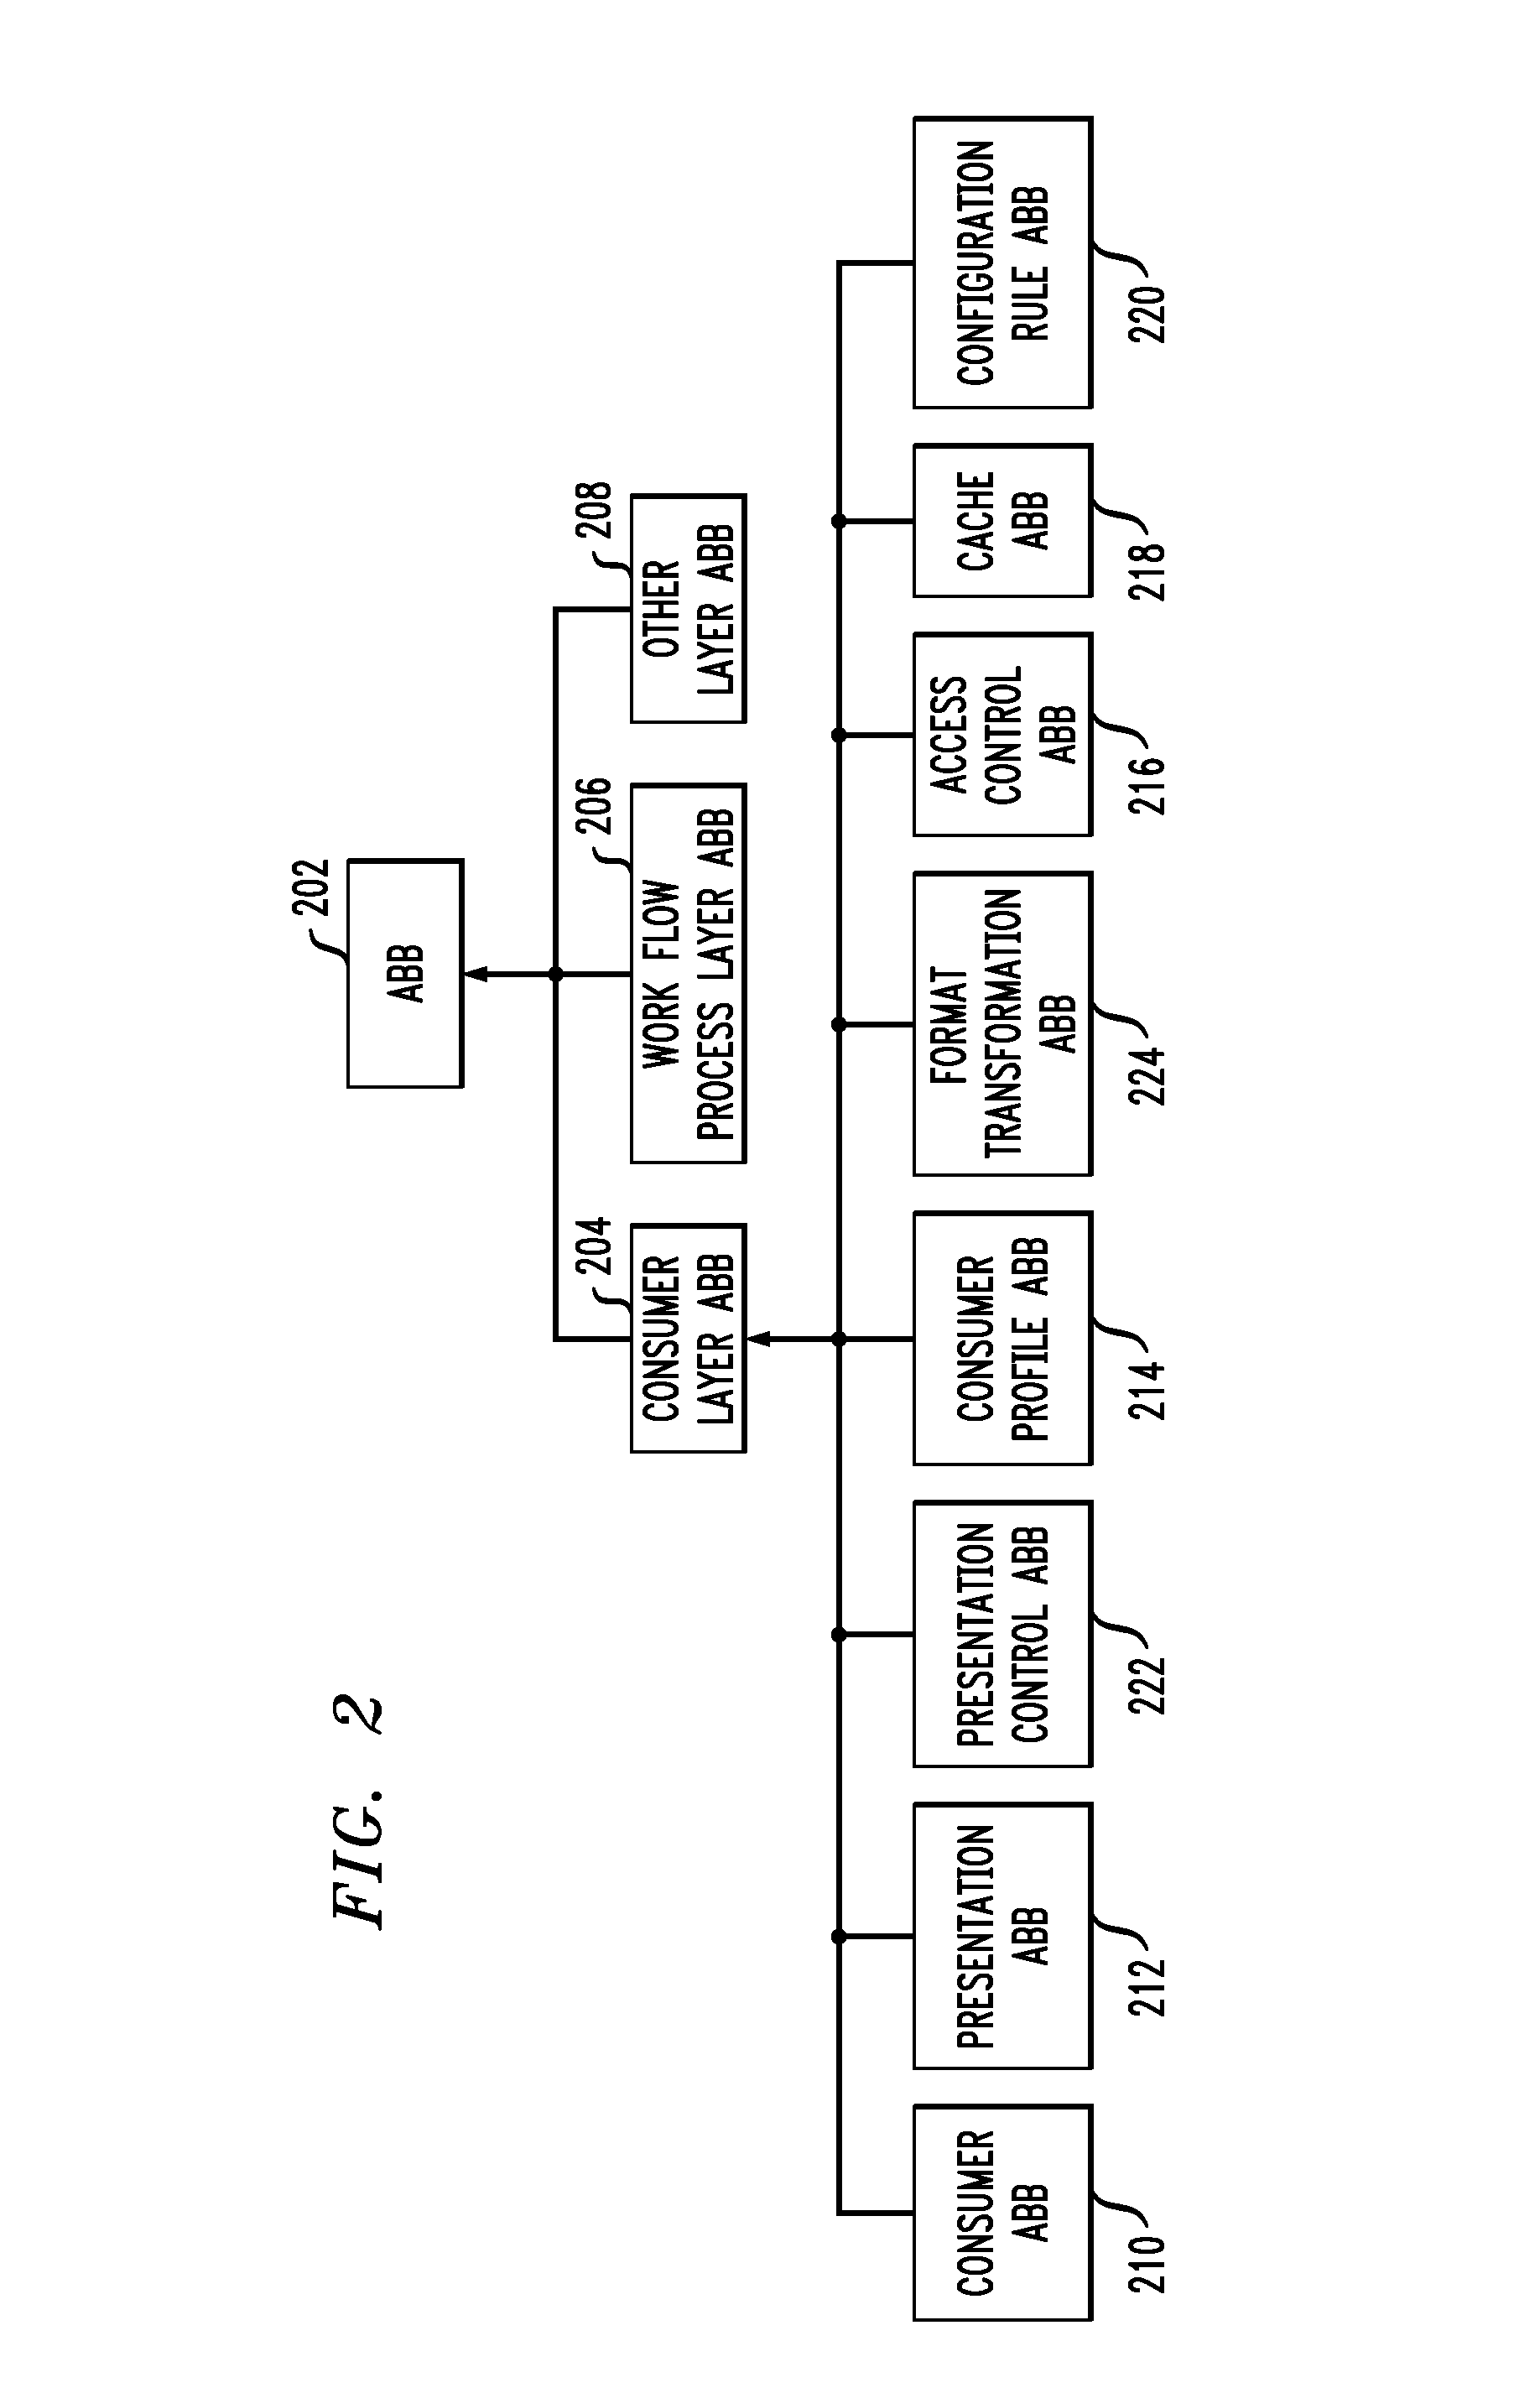 Method and Apparatus for Representing and Configuring Flexible and Extensible Presentation Patterns